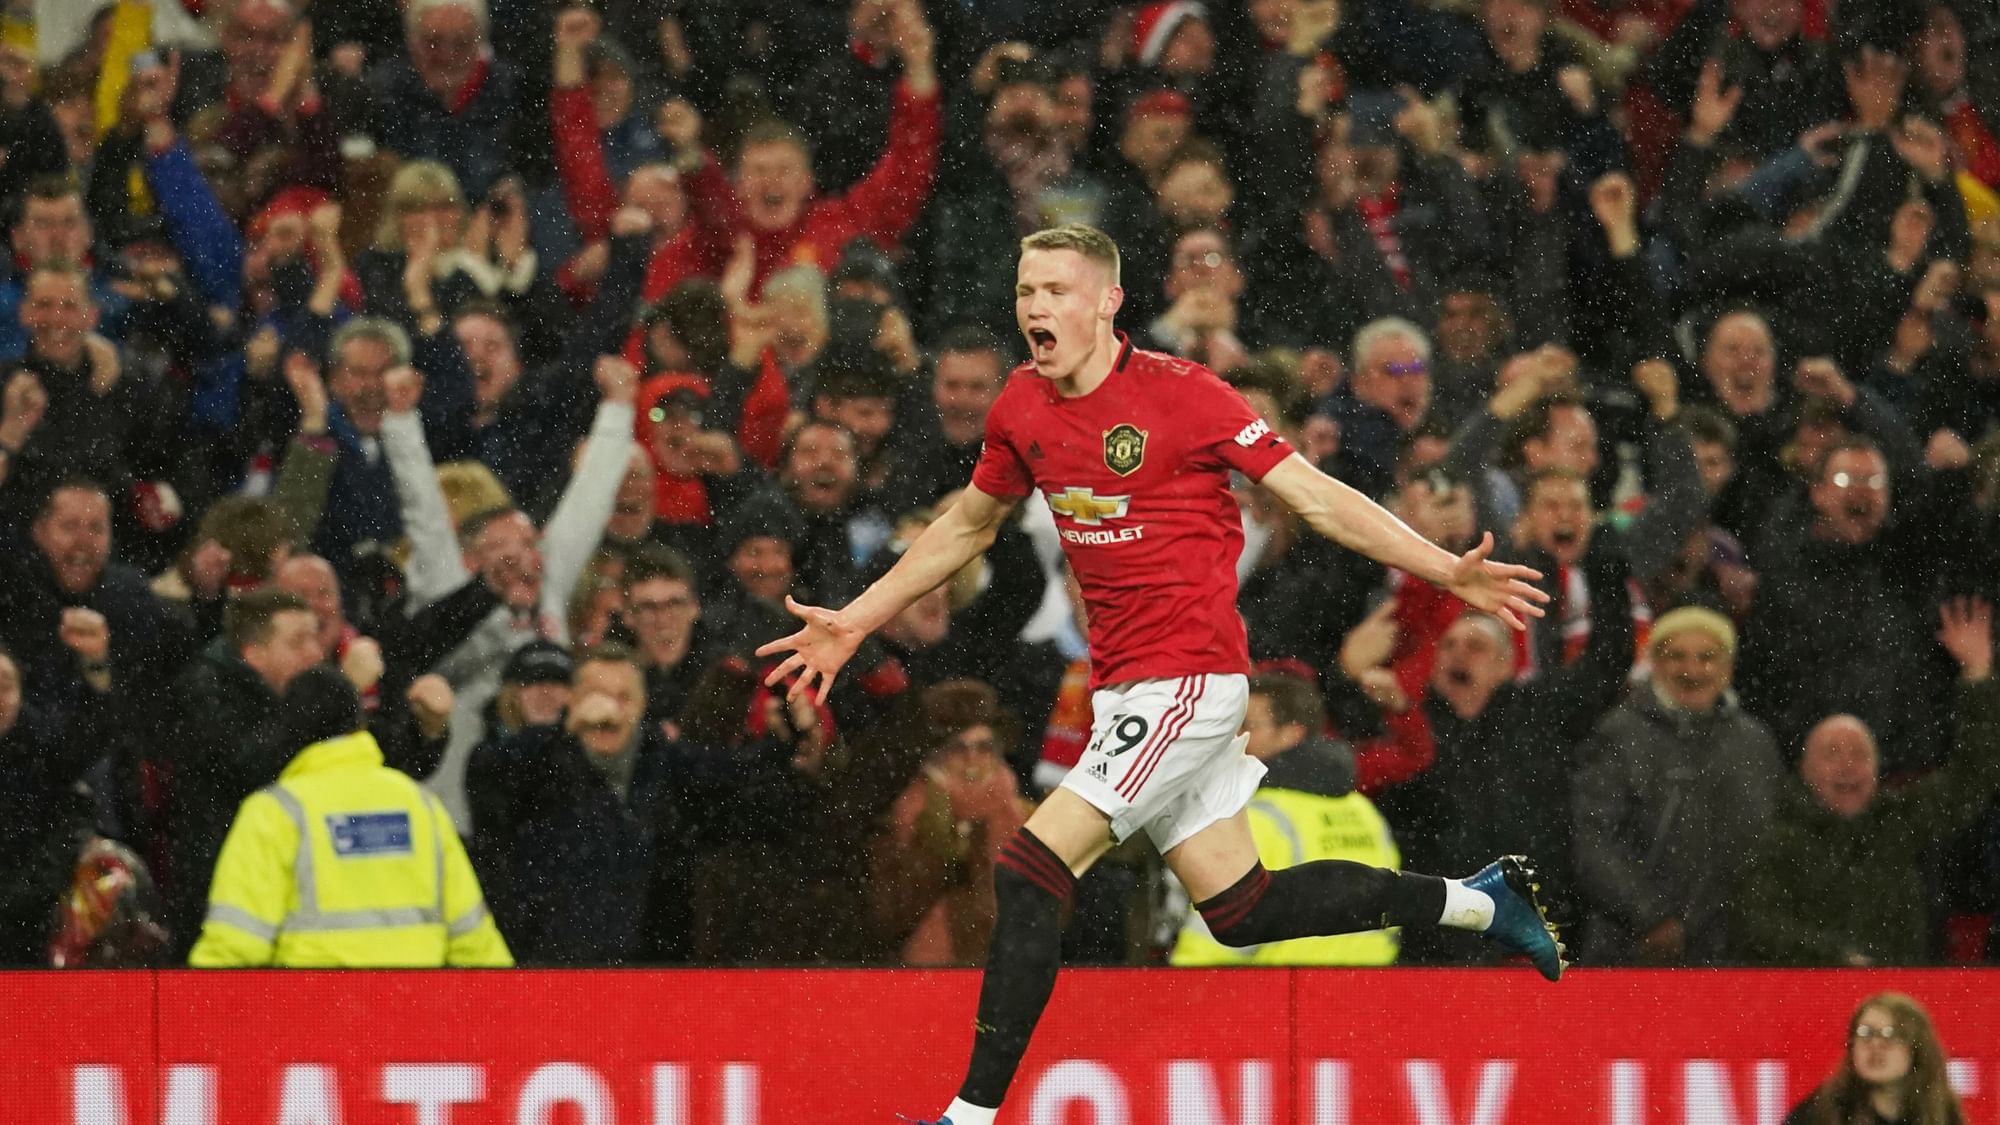 Manchester United’s Scott McTominay celebrates after scoring his side’s second goal during the English Premier League soccer match between Manchester United and Manchester City at Old Trafford.